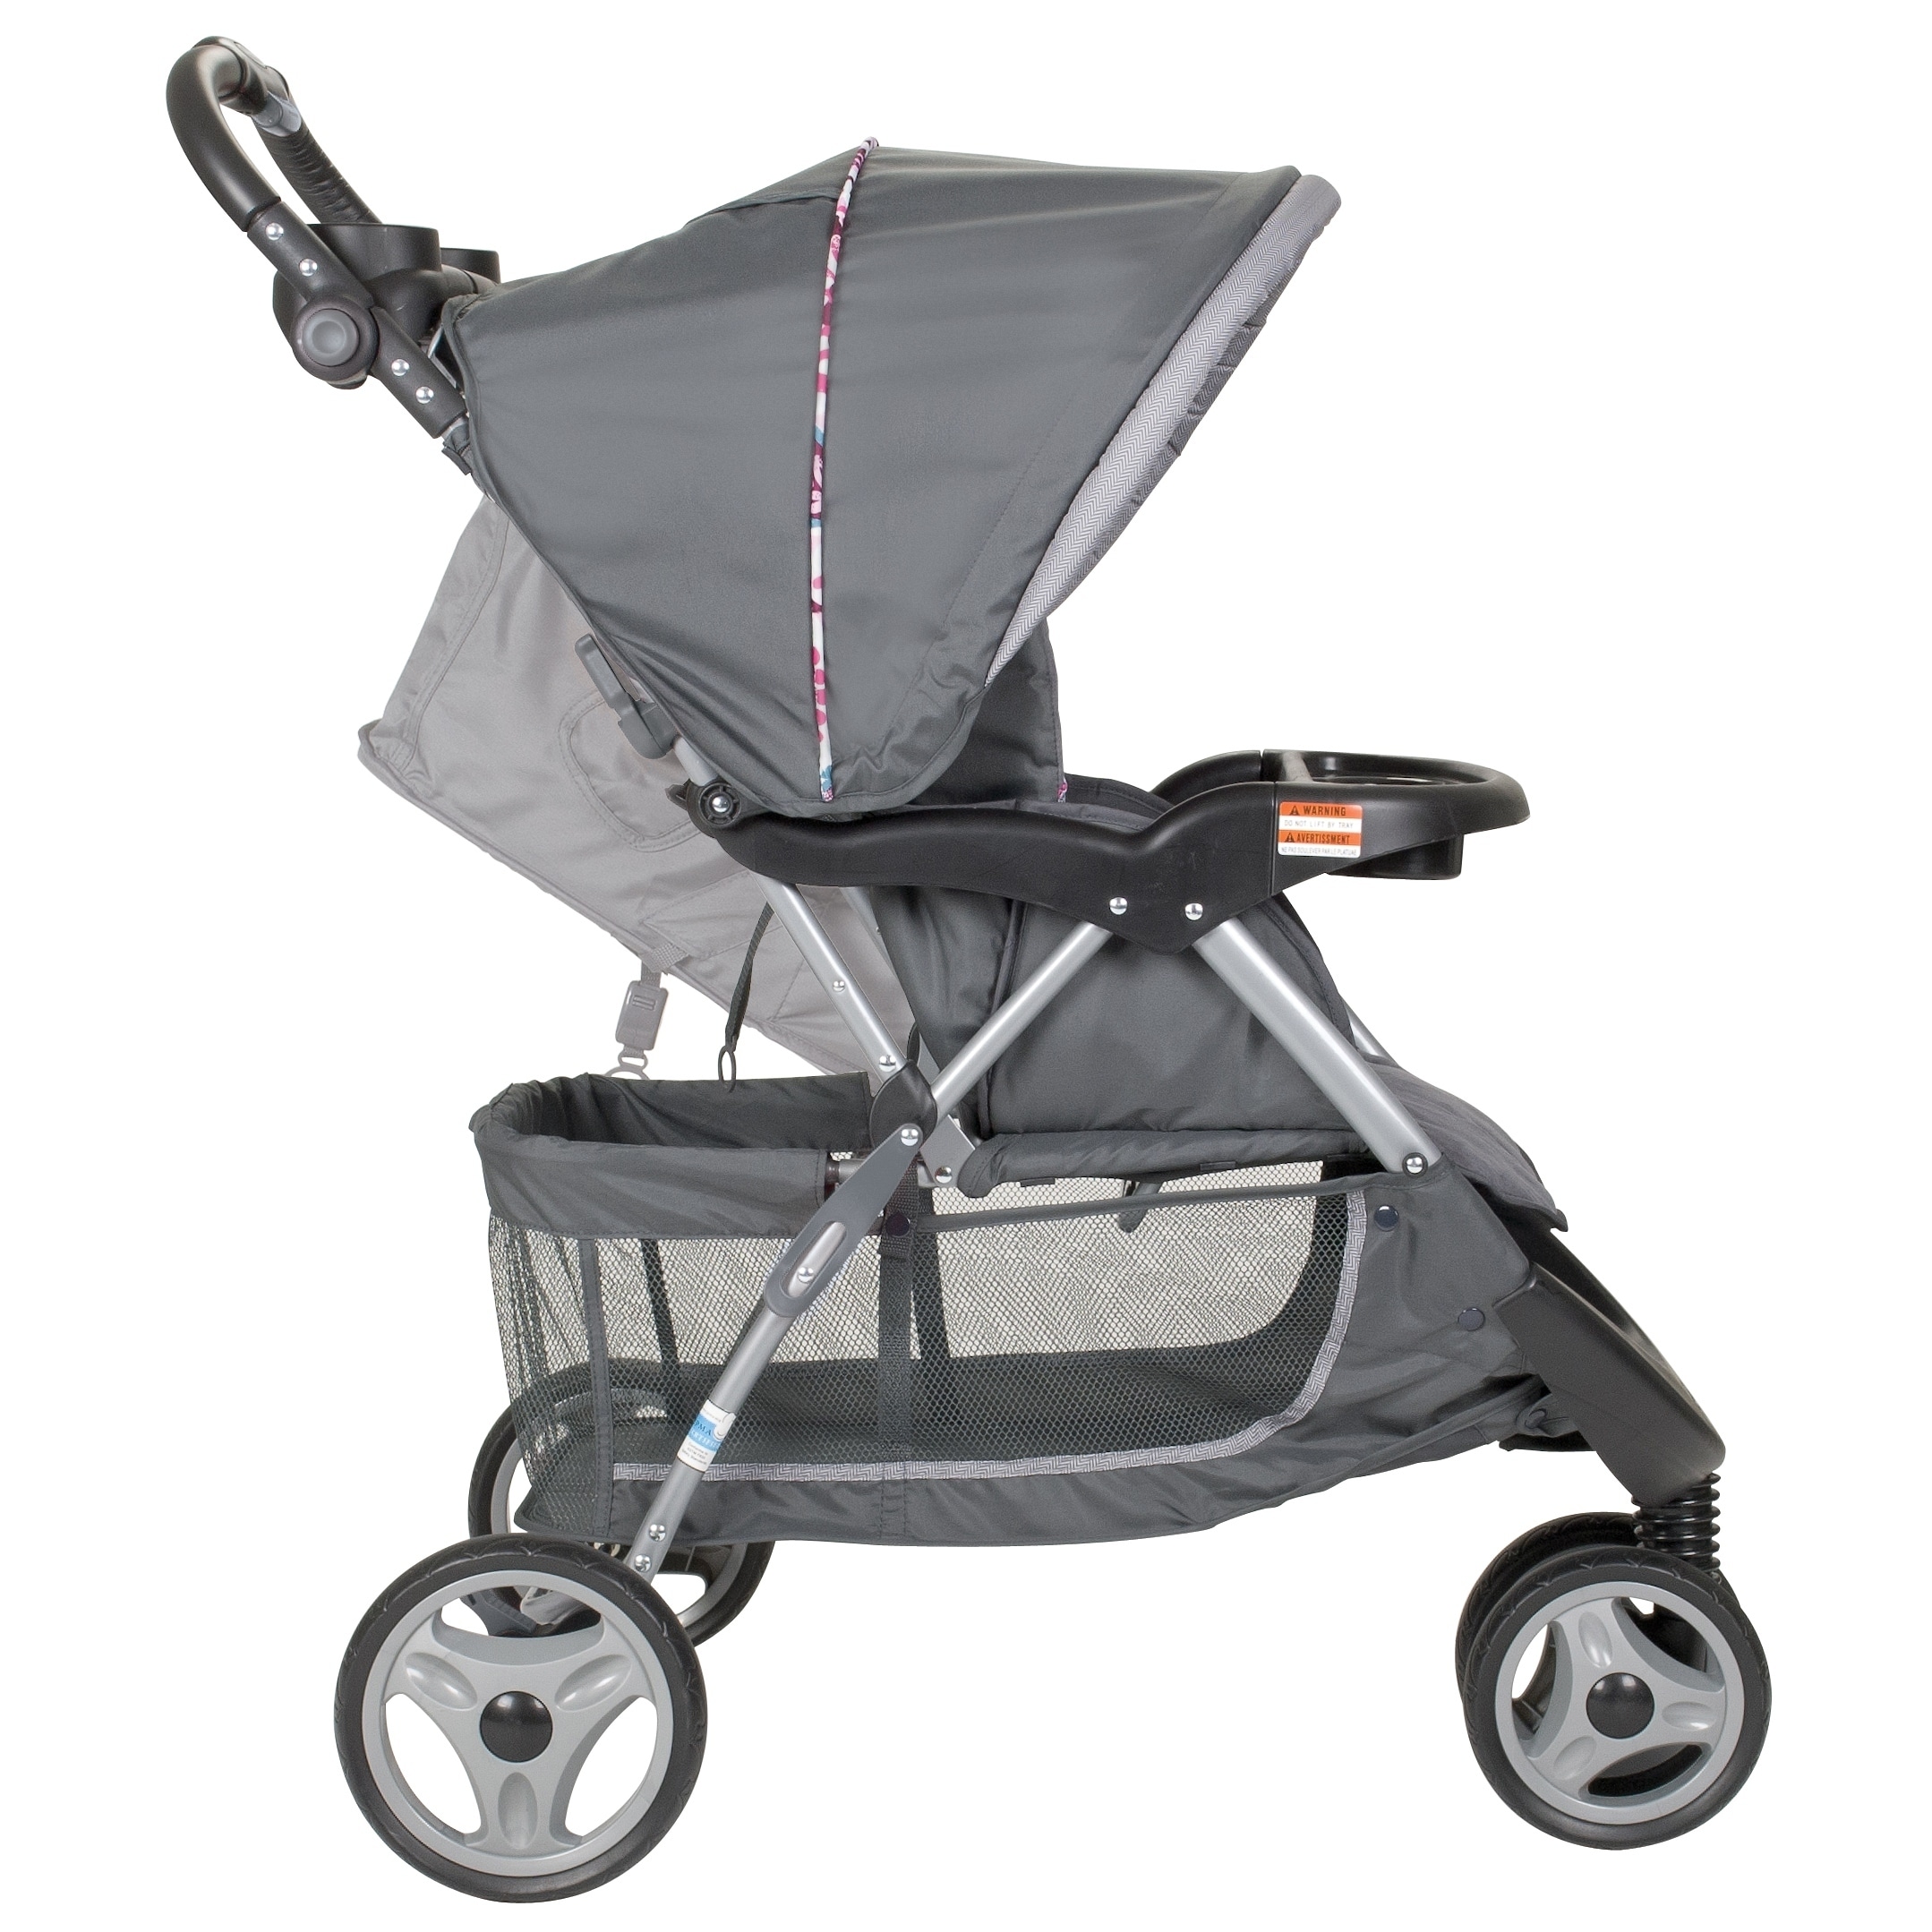 Baby Trend EZ Ride 5 Travel System, Paisley - image 5 of 6